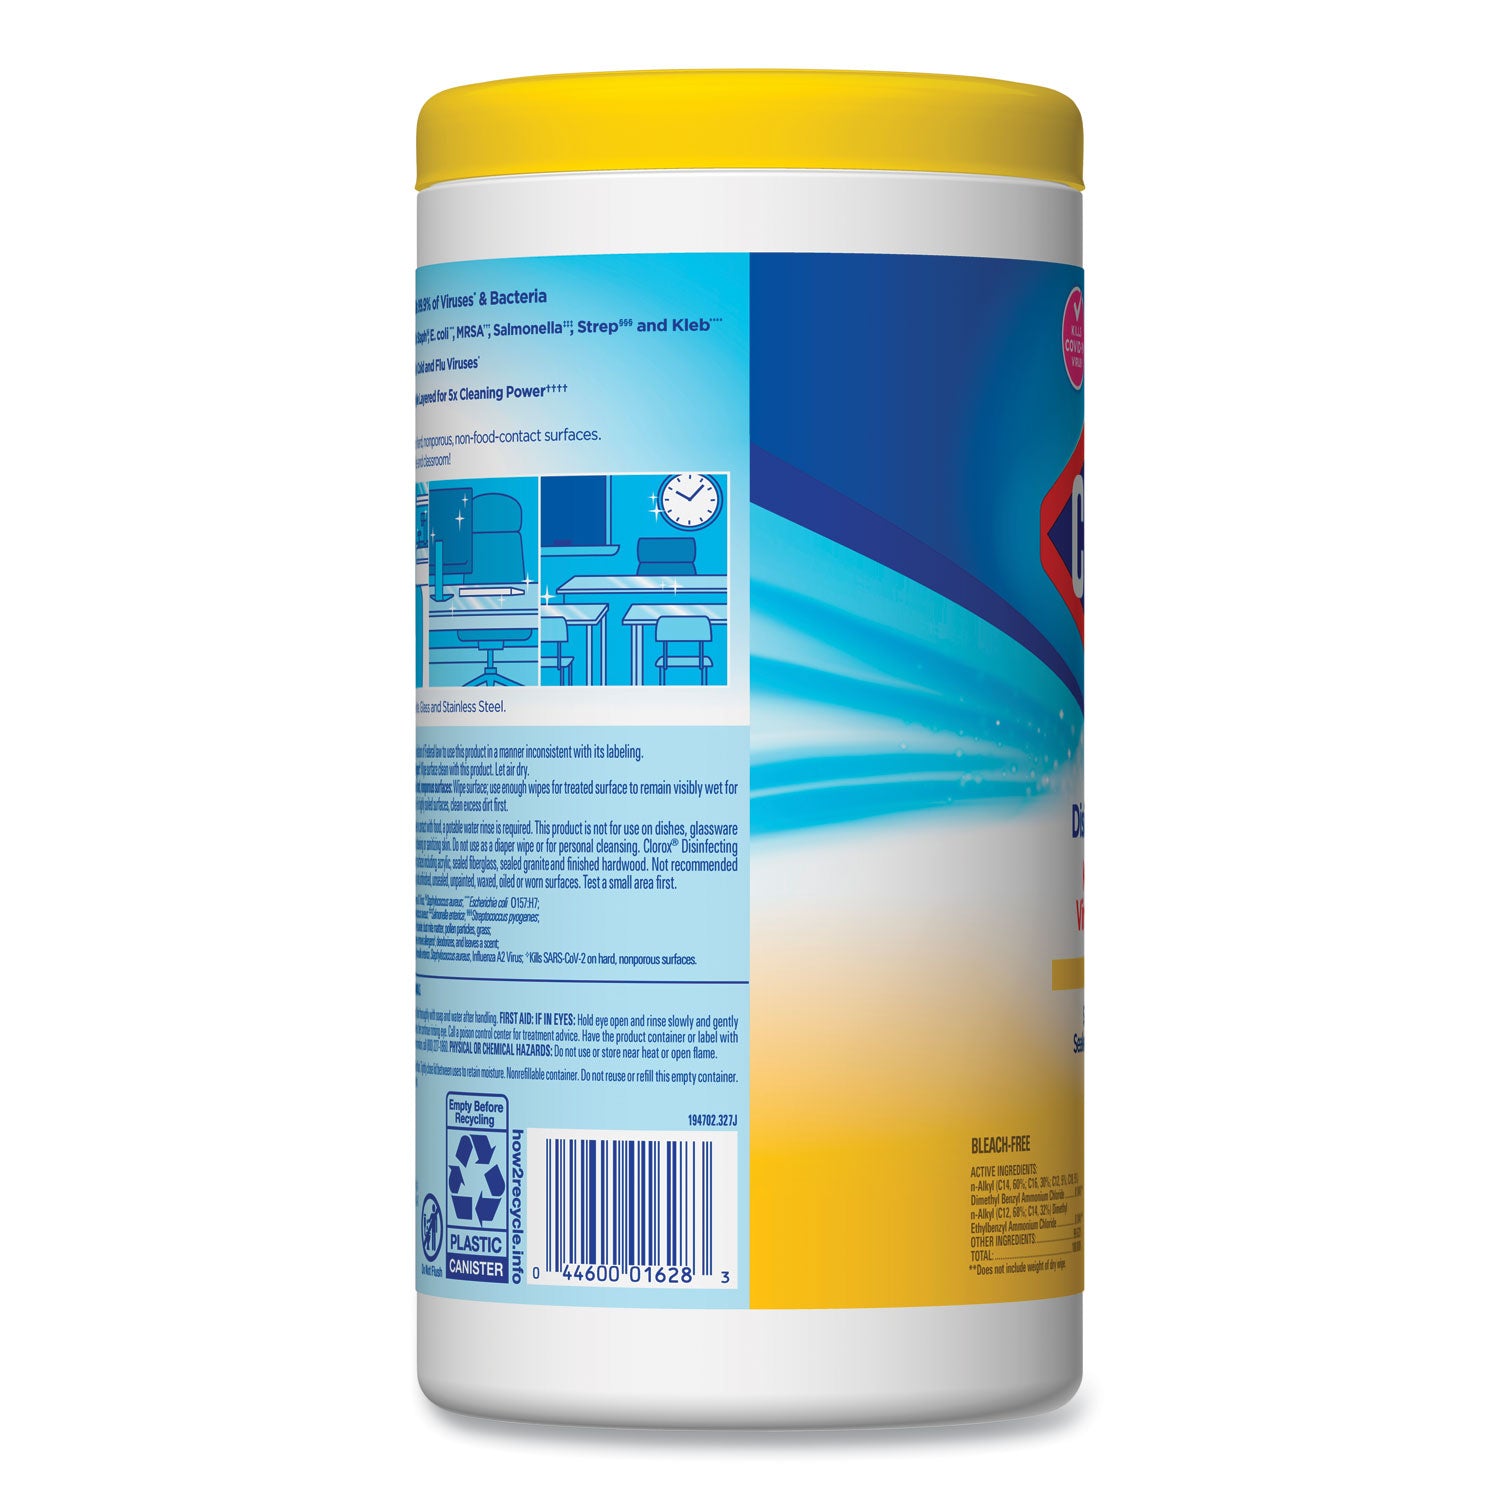 disinfecting-wipes-1-ply-7-x-775-crisp-lemon-white-75-canister-6-canisters-carton_clo01628 - 4